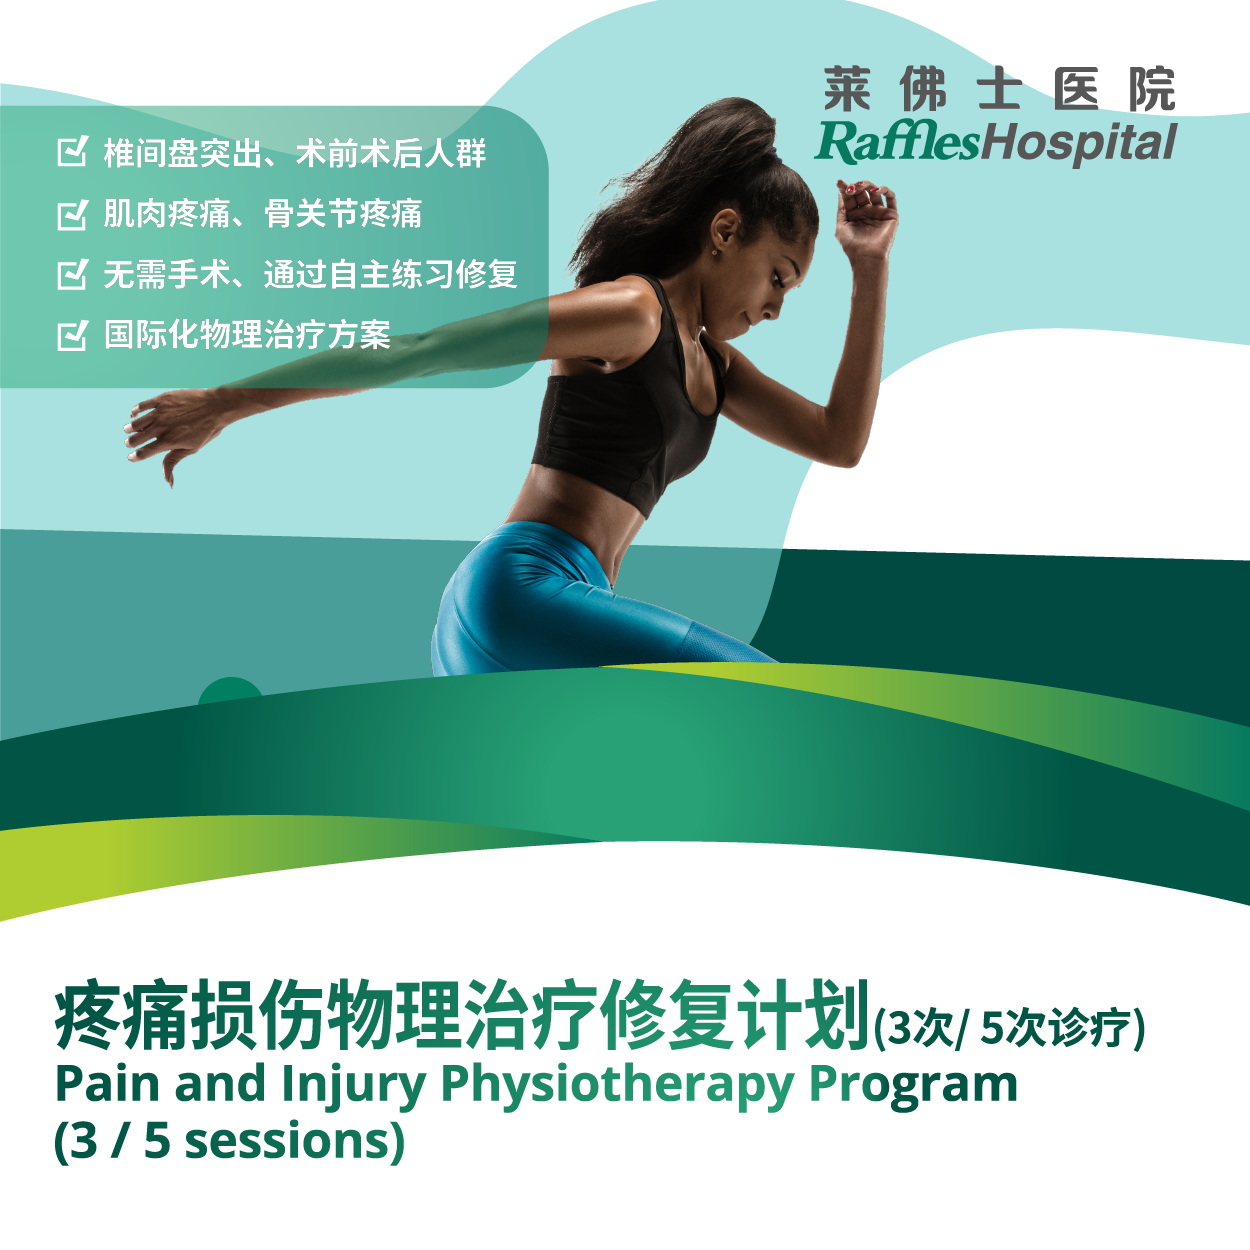 Raffles Hospital Beijing - Special Offer Packages - Pain and Injury Physiotherapy Programme